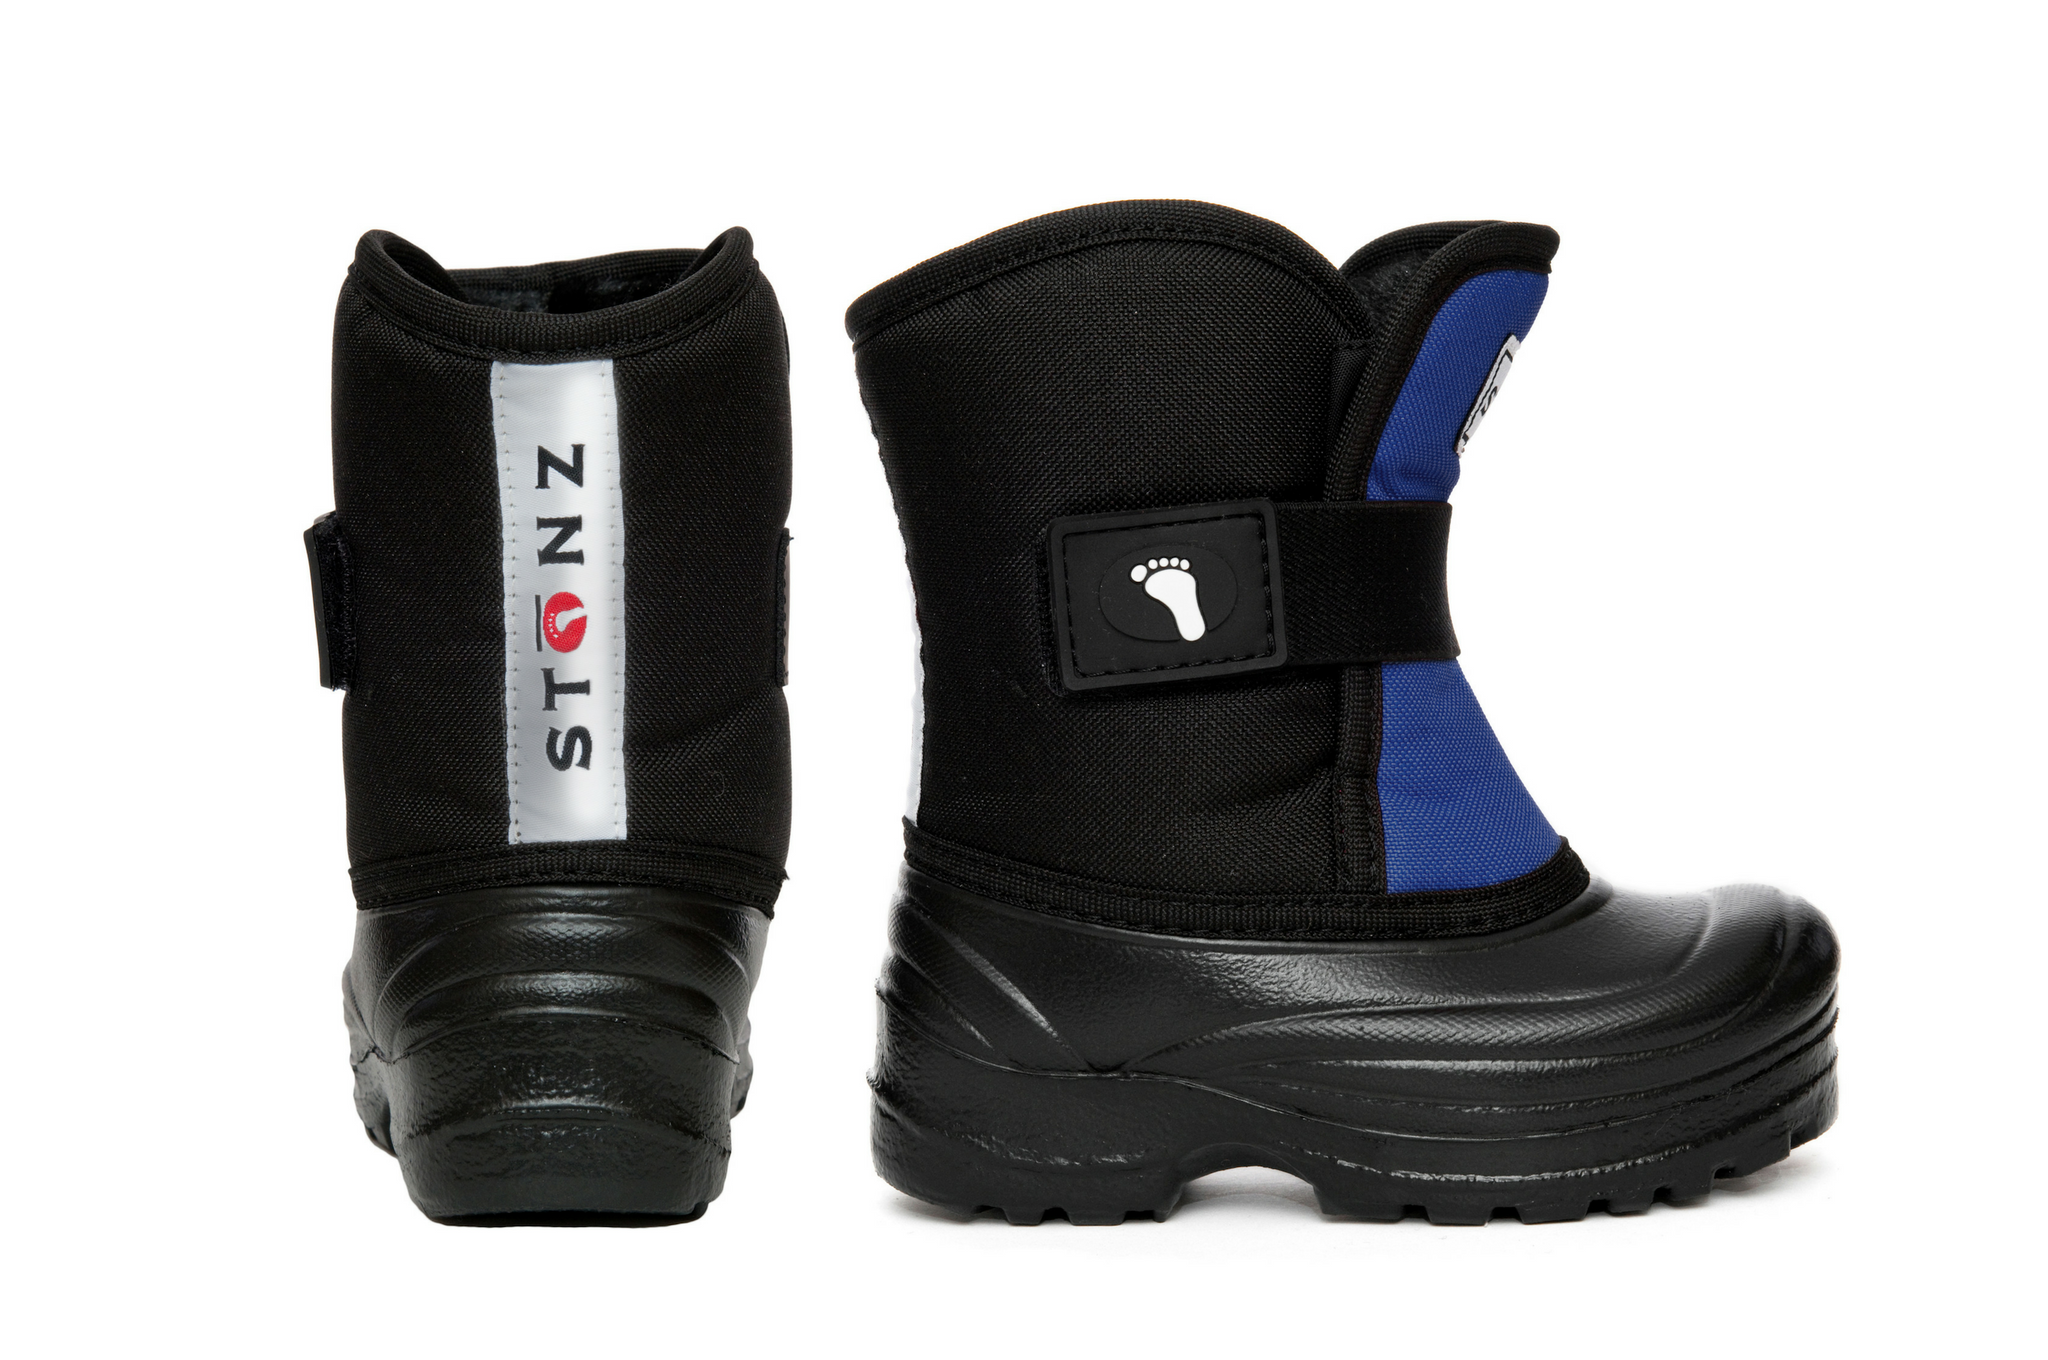 Scout Winter - Reflective Stonz Weather-resistant | Shoes Toddlers for - | Boots Grey/Black